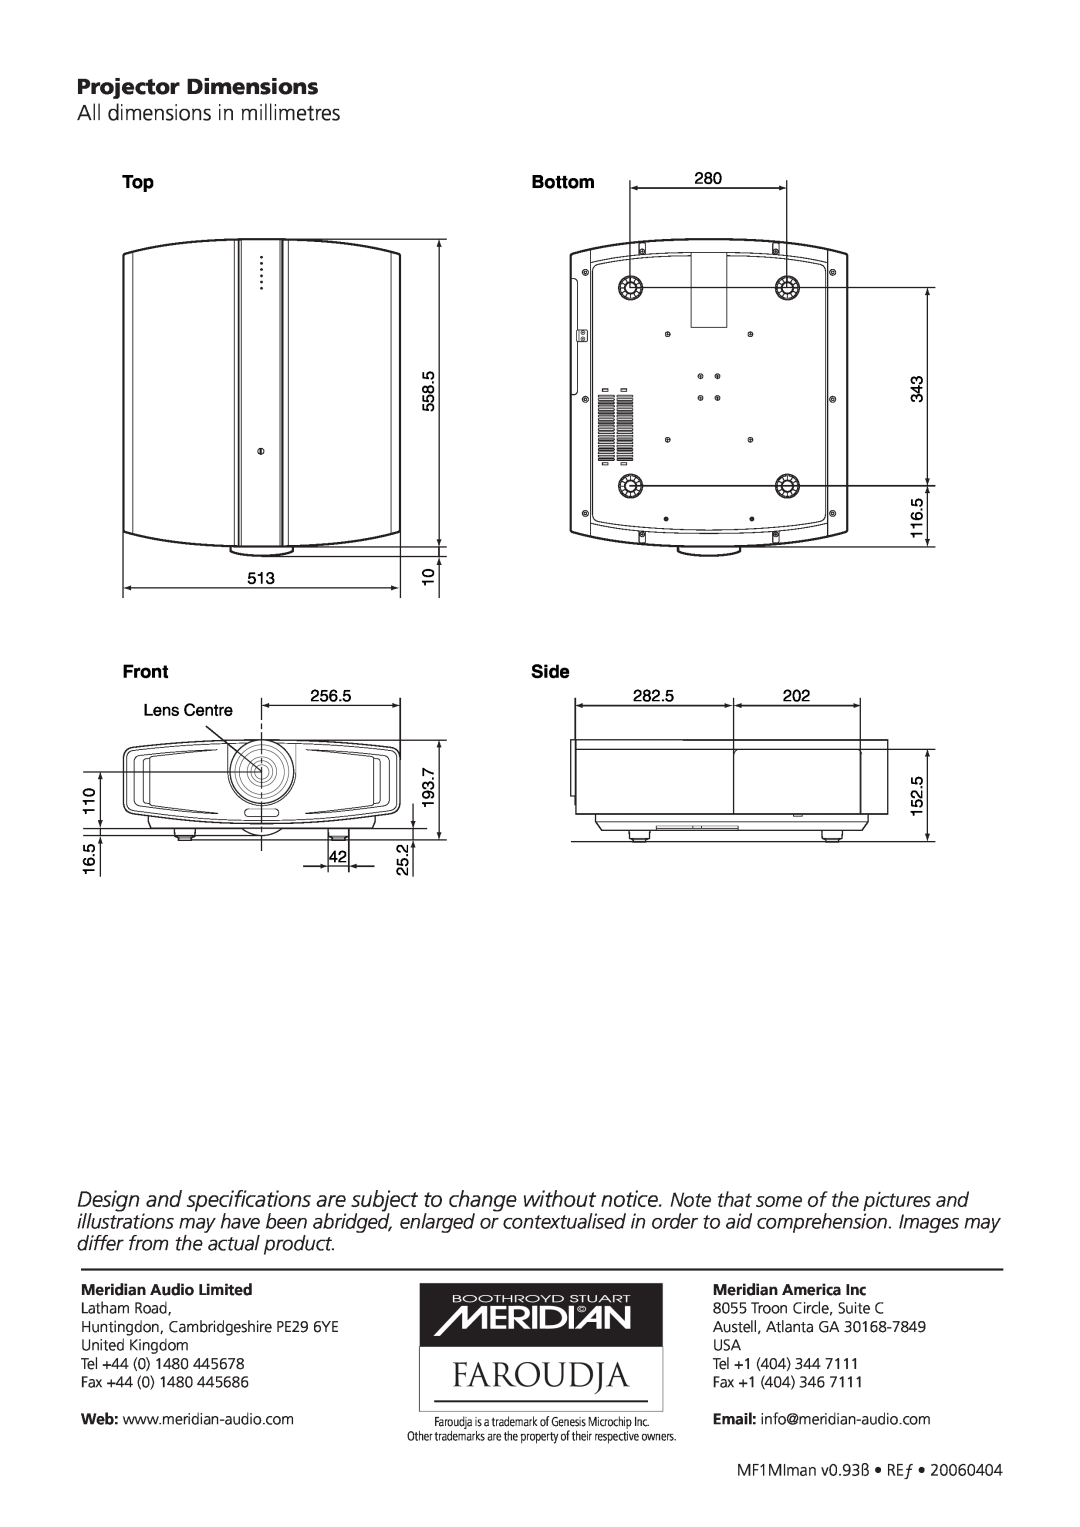 Meridian America D-ILA 1080MF1 operation manual Projector Dimensions, All dimensions in millimetres 